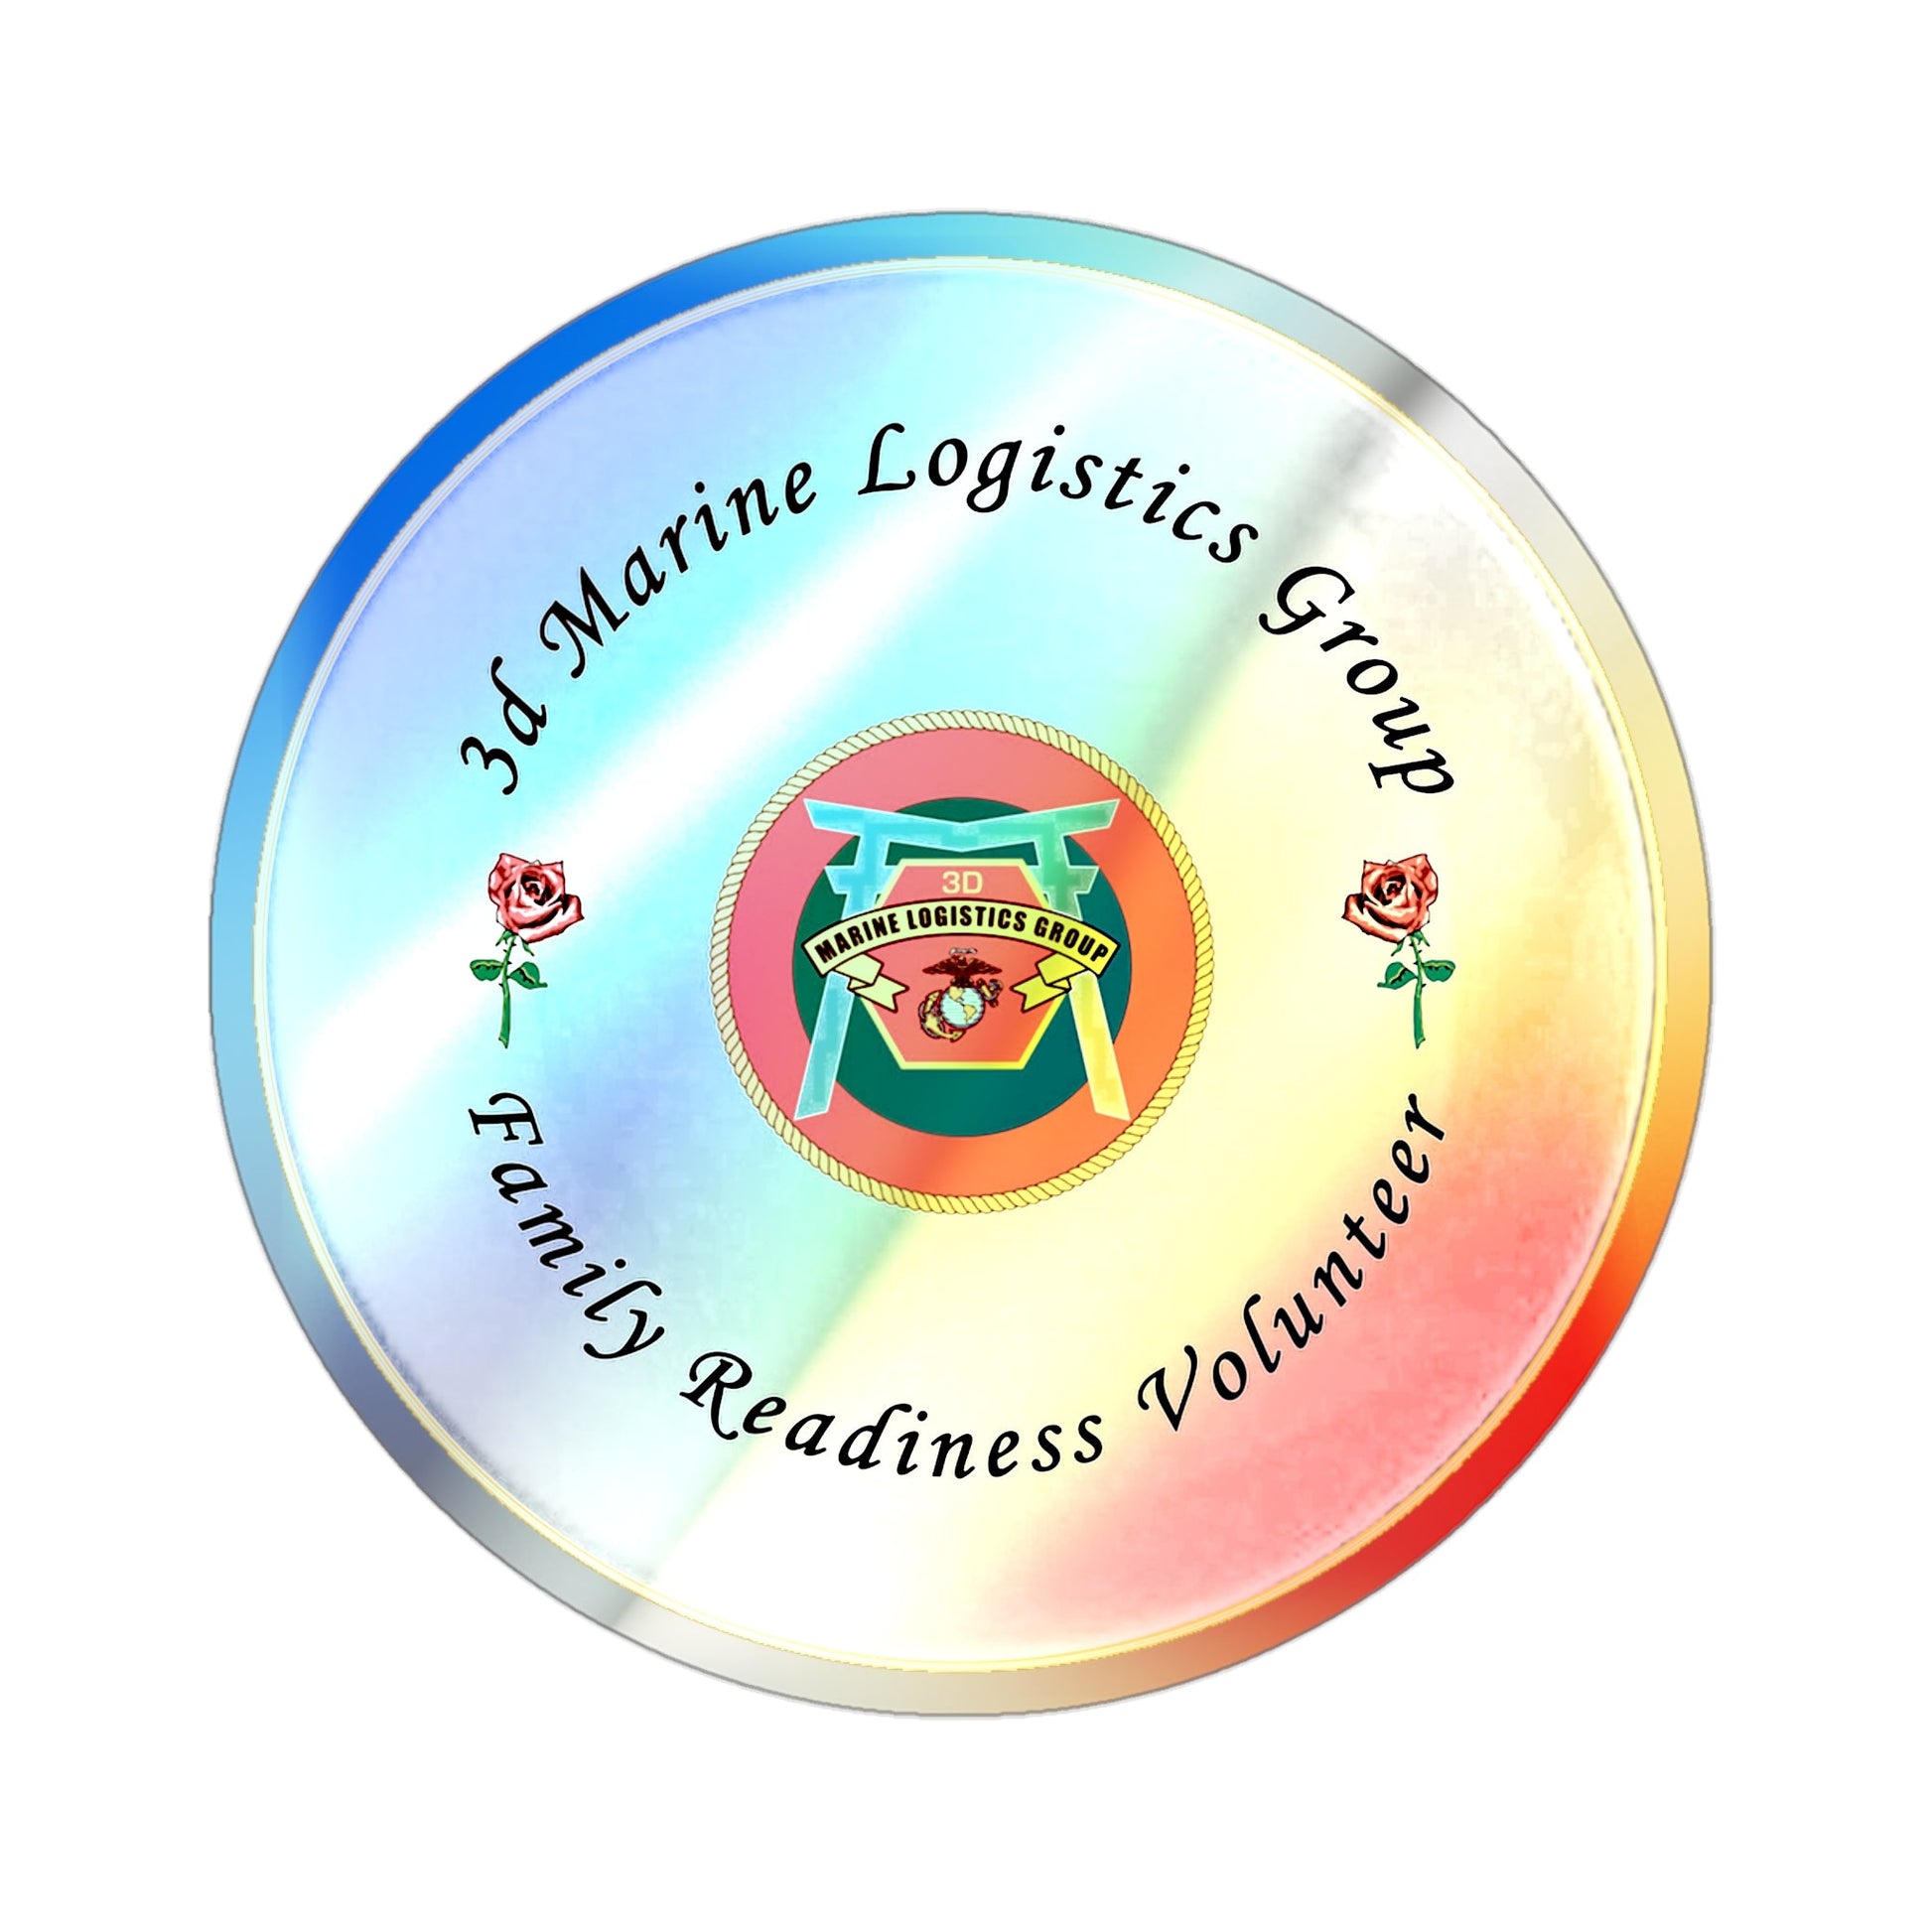 3d Marines Logistics Group Family Readiness Volunteer (USMC) Holographic STICKER Die-Cut Vinyl Decal-3 Inch-The Sticker Space